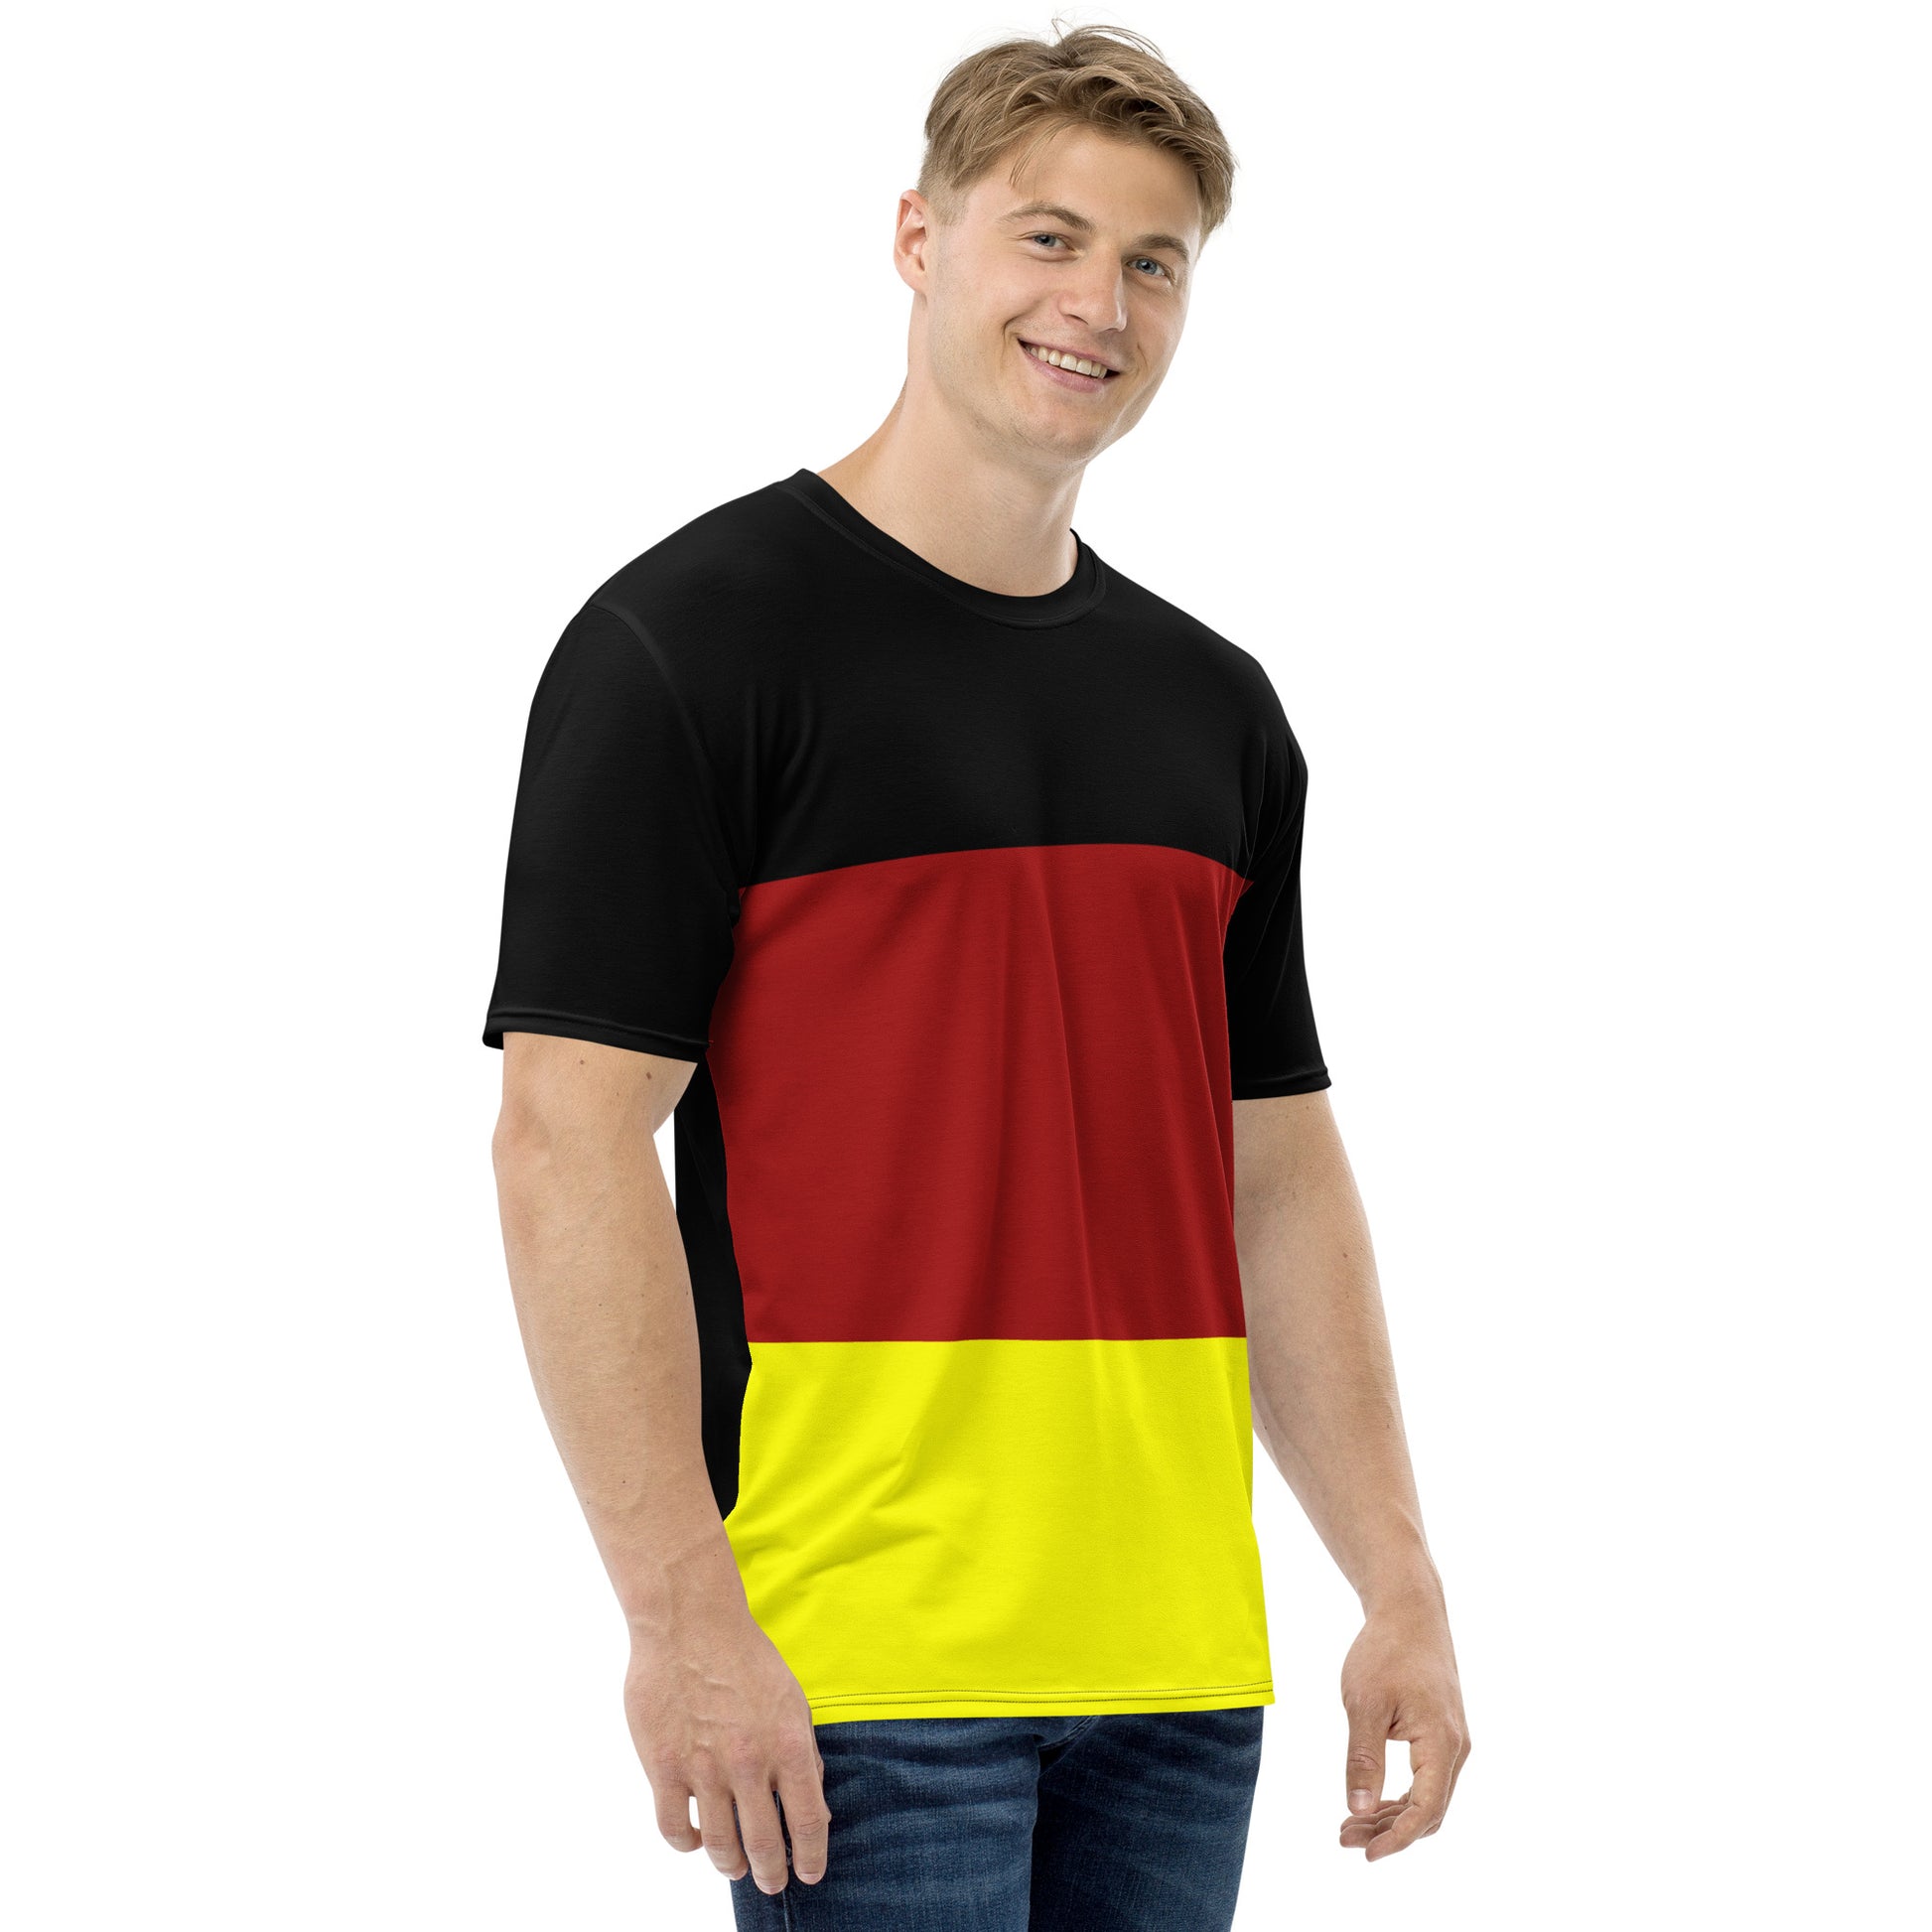 T-shirt with German flag: Perfect for patriotic occasions